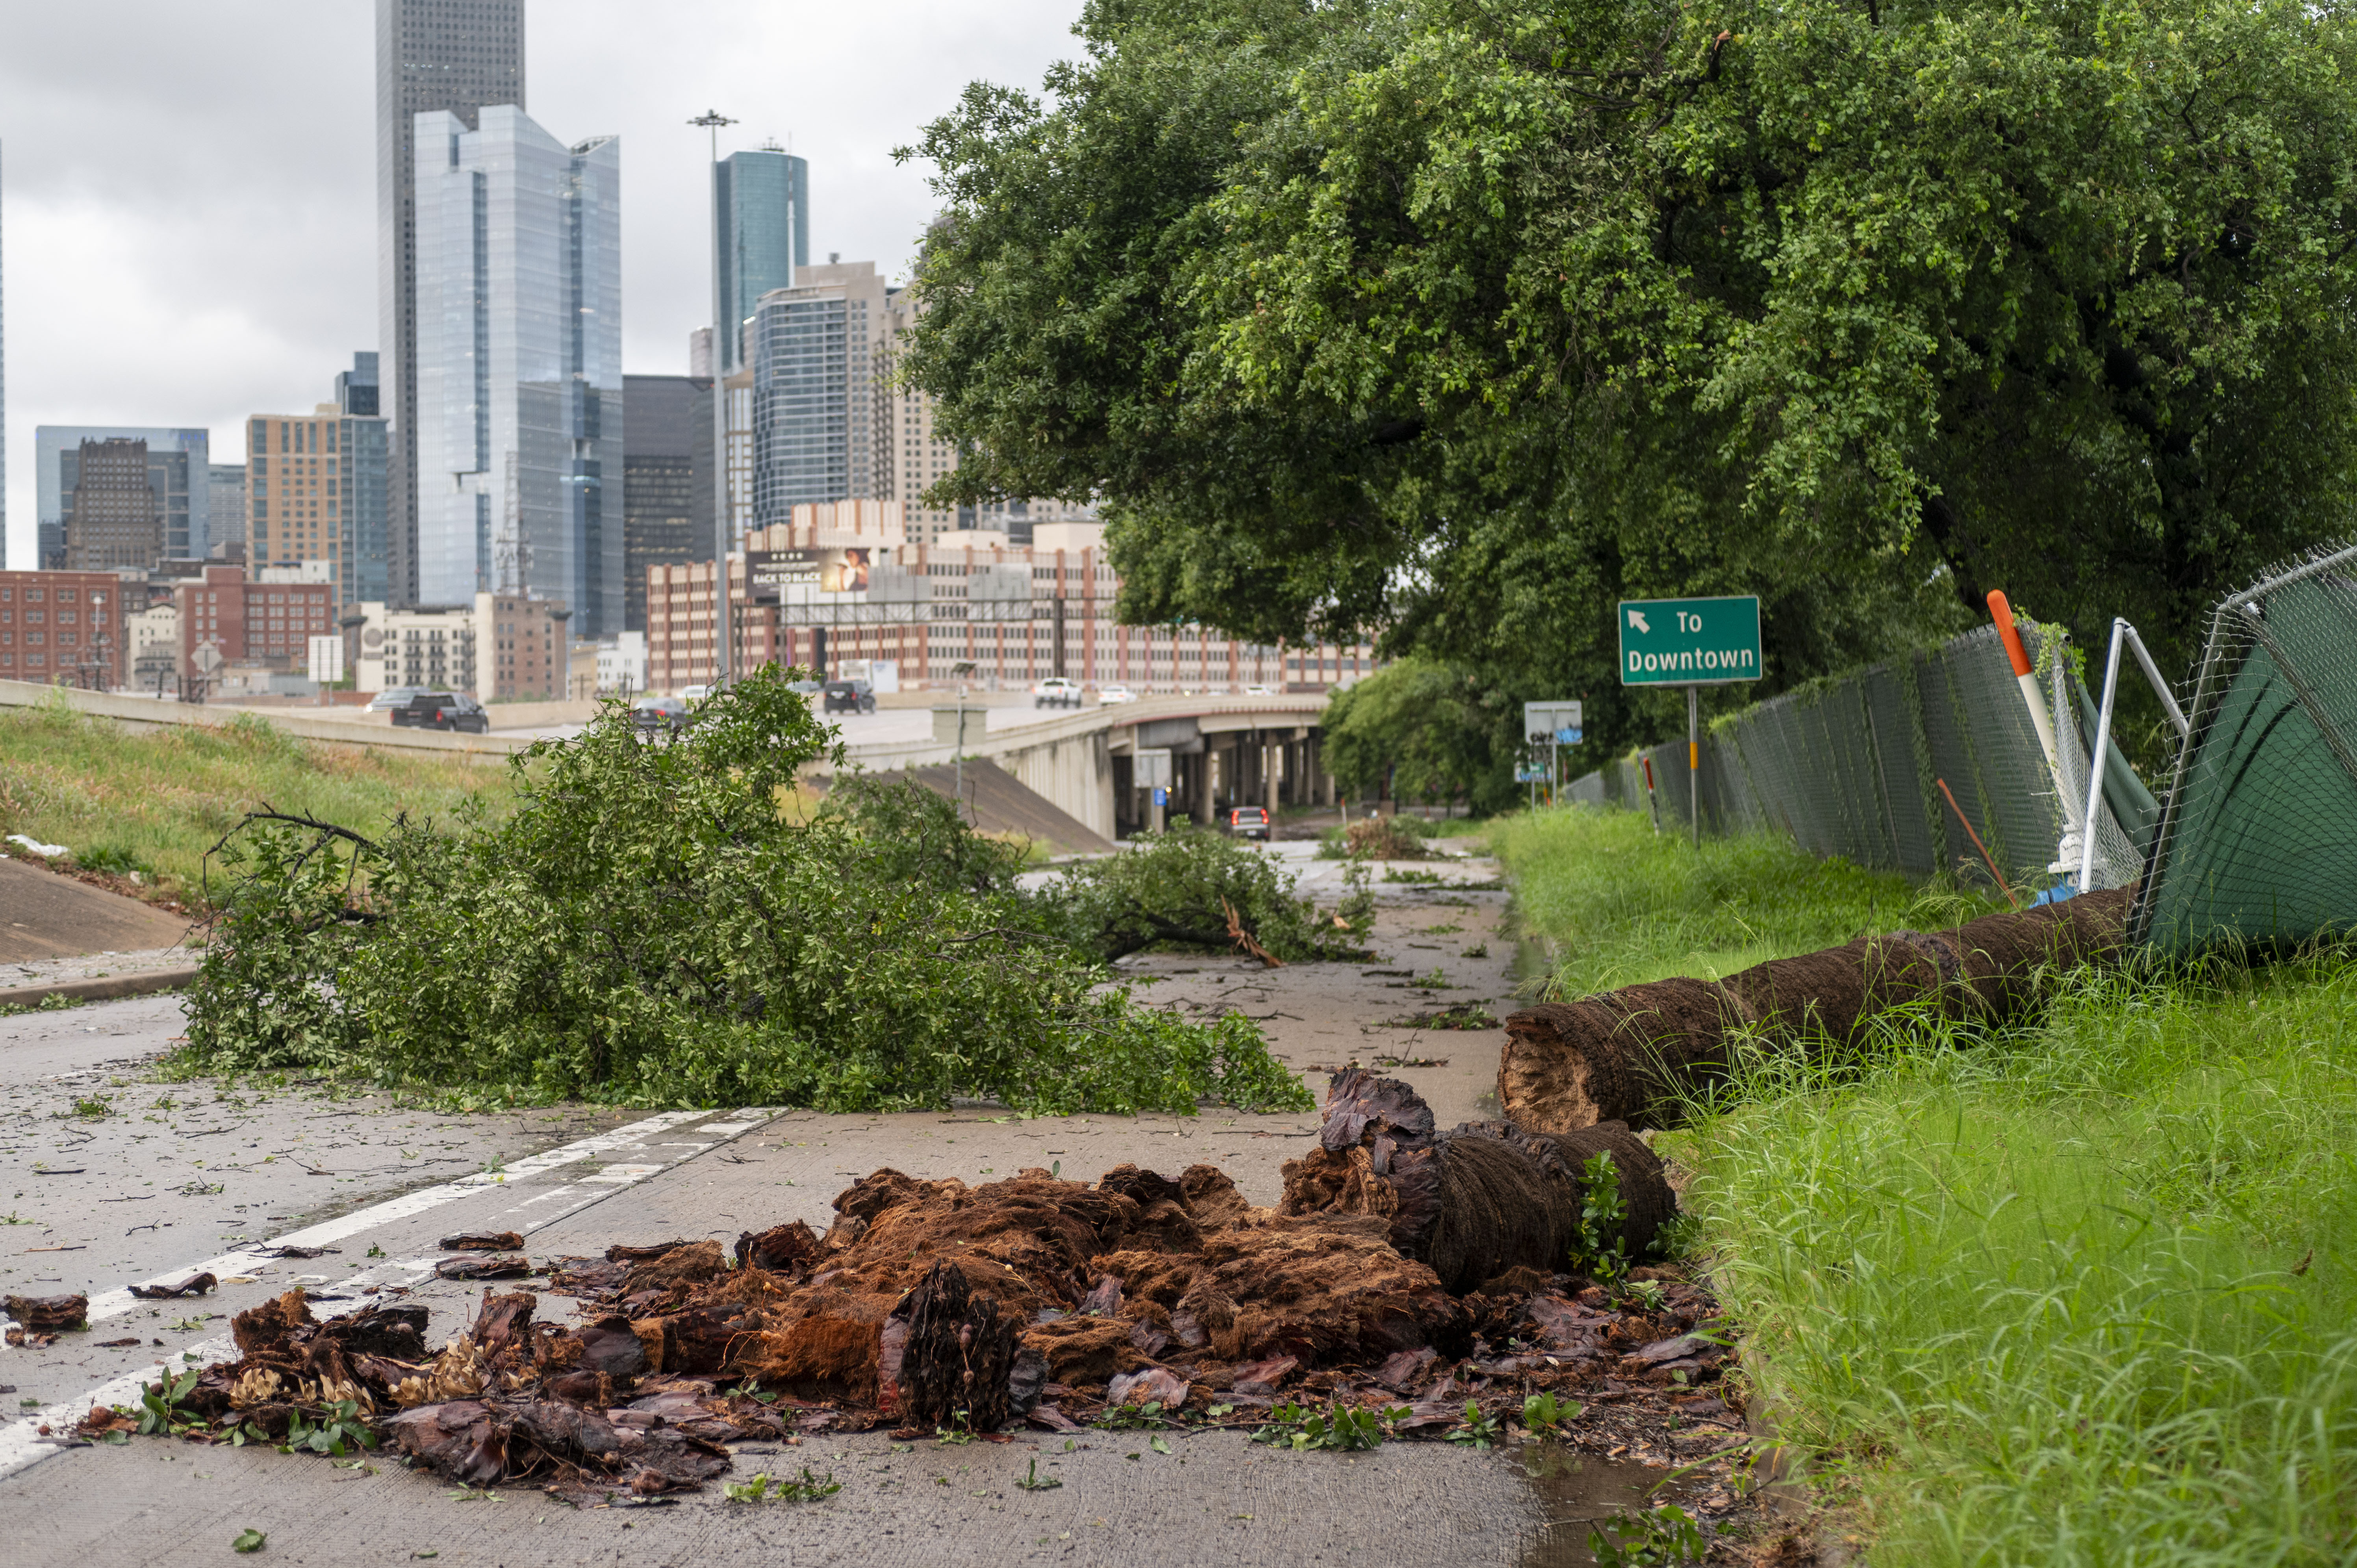 Debris is scattered across a slicked roadway with a view of downtown Houston high-rises in the background. 